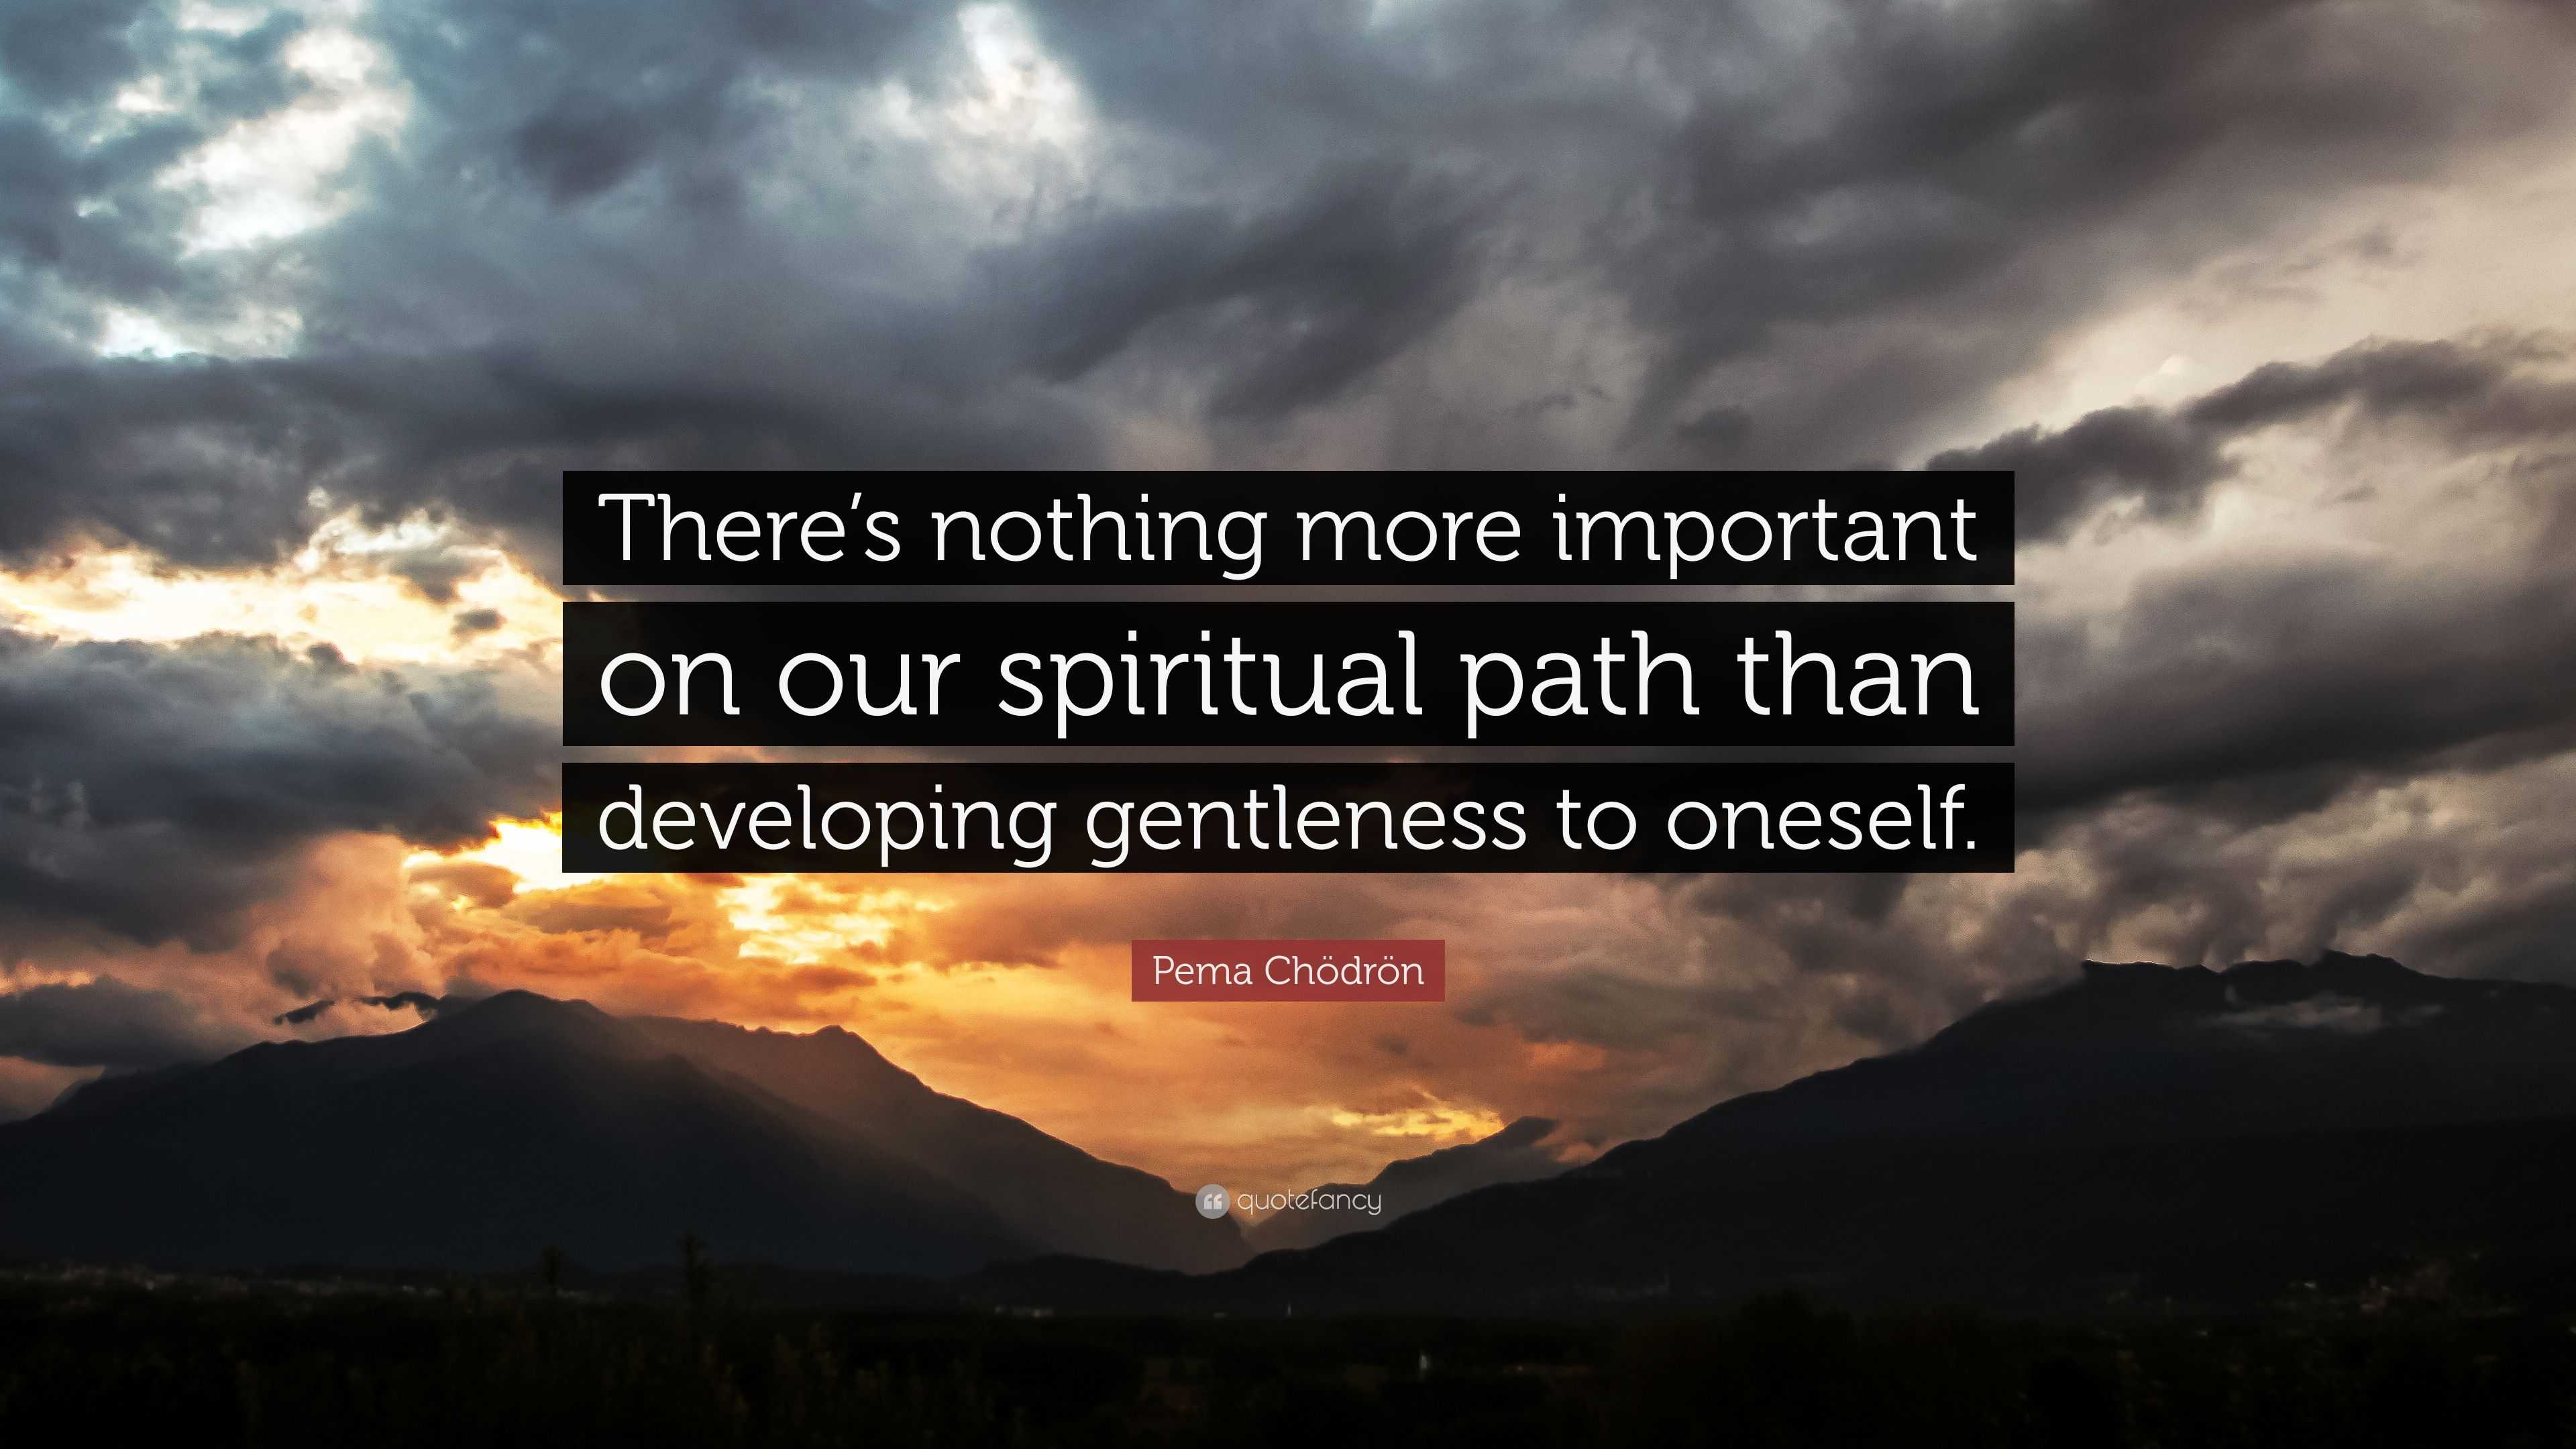 Pema Chödrön Quote: “There’s nothing more important on our spiritual ...